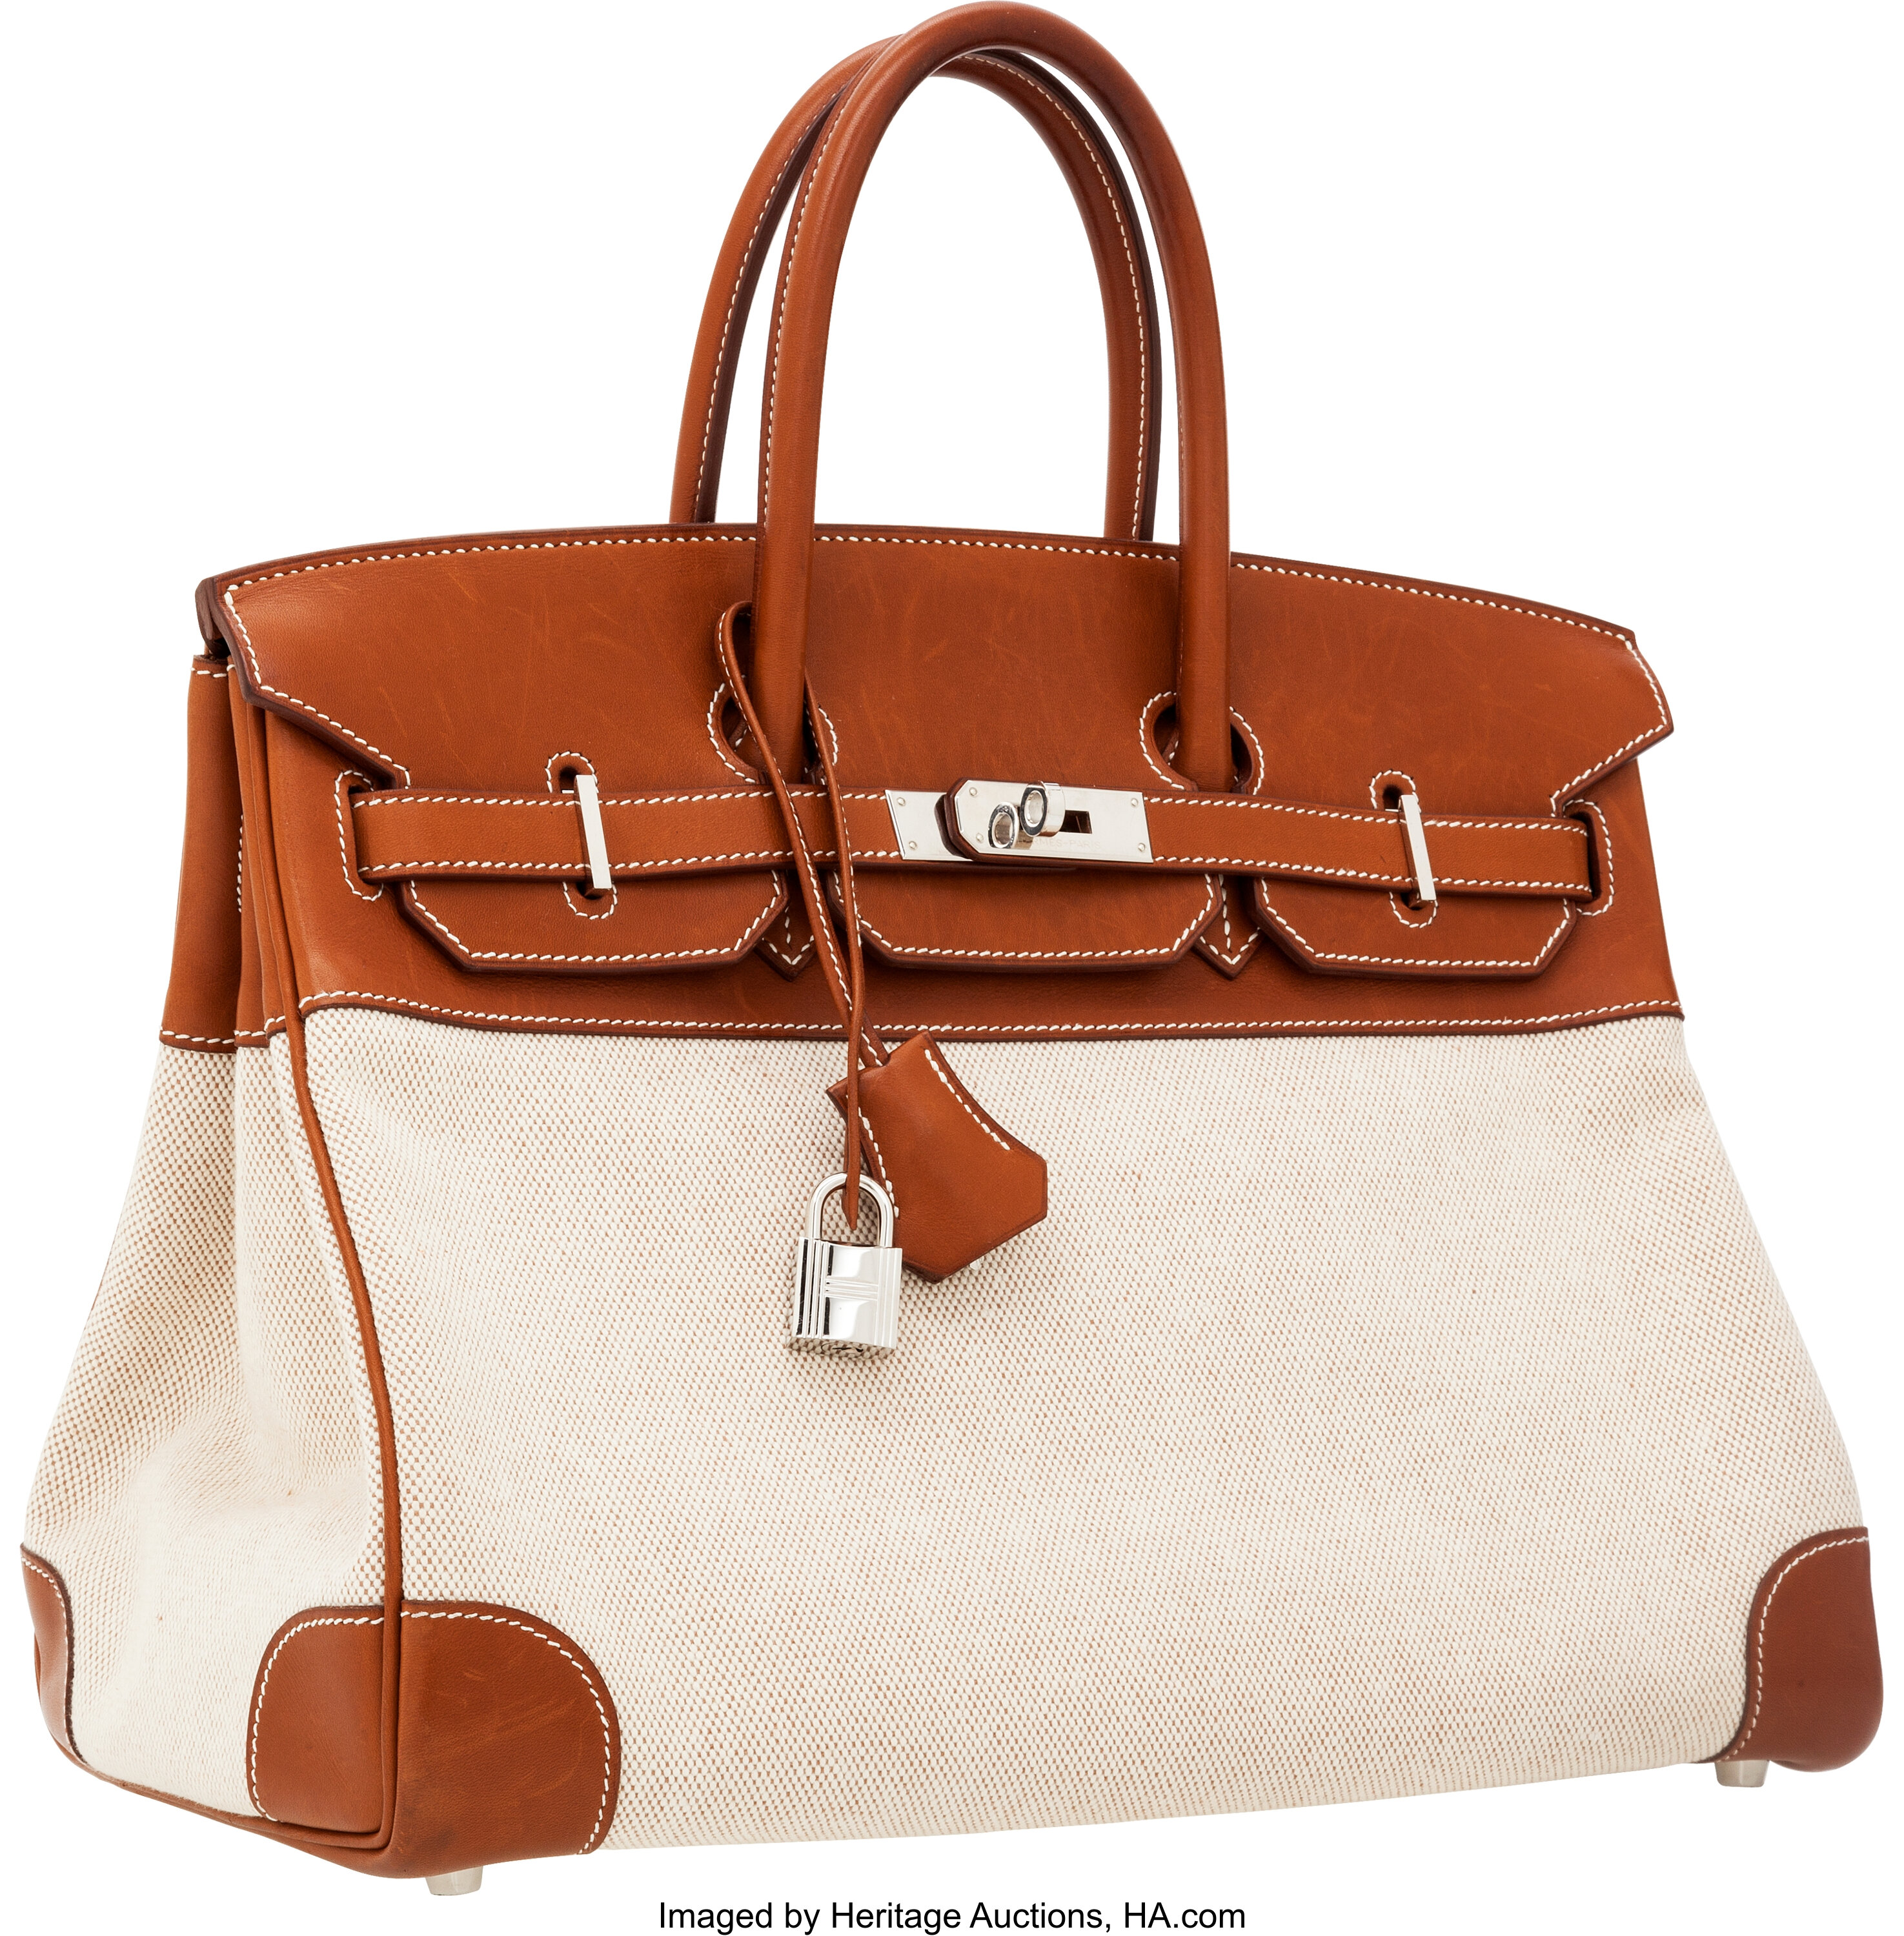 Sold at Auction: Hermes Birkin 30 Bag in Toile and Barenia Leather